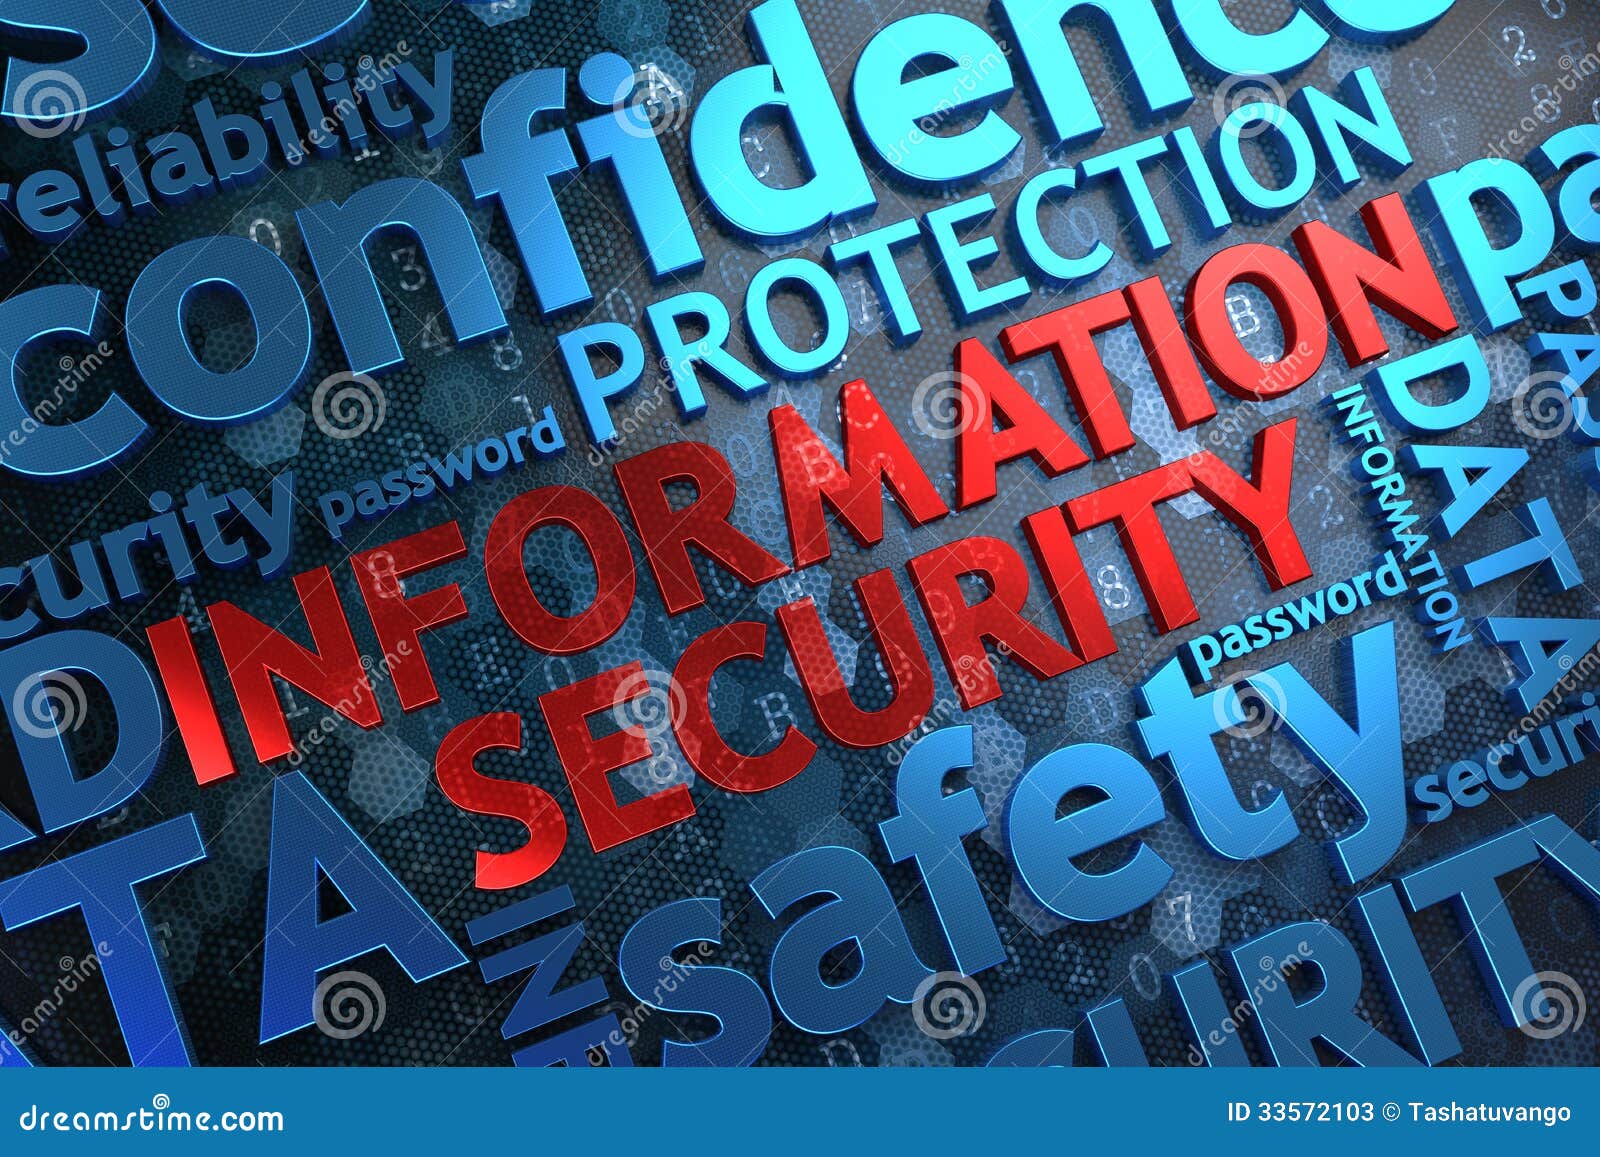 free clipart information security - photo #47